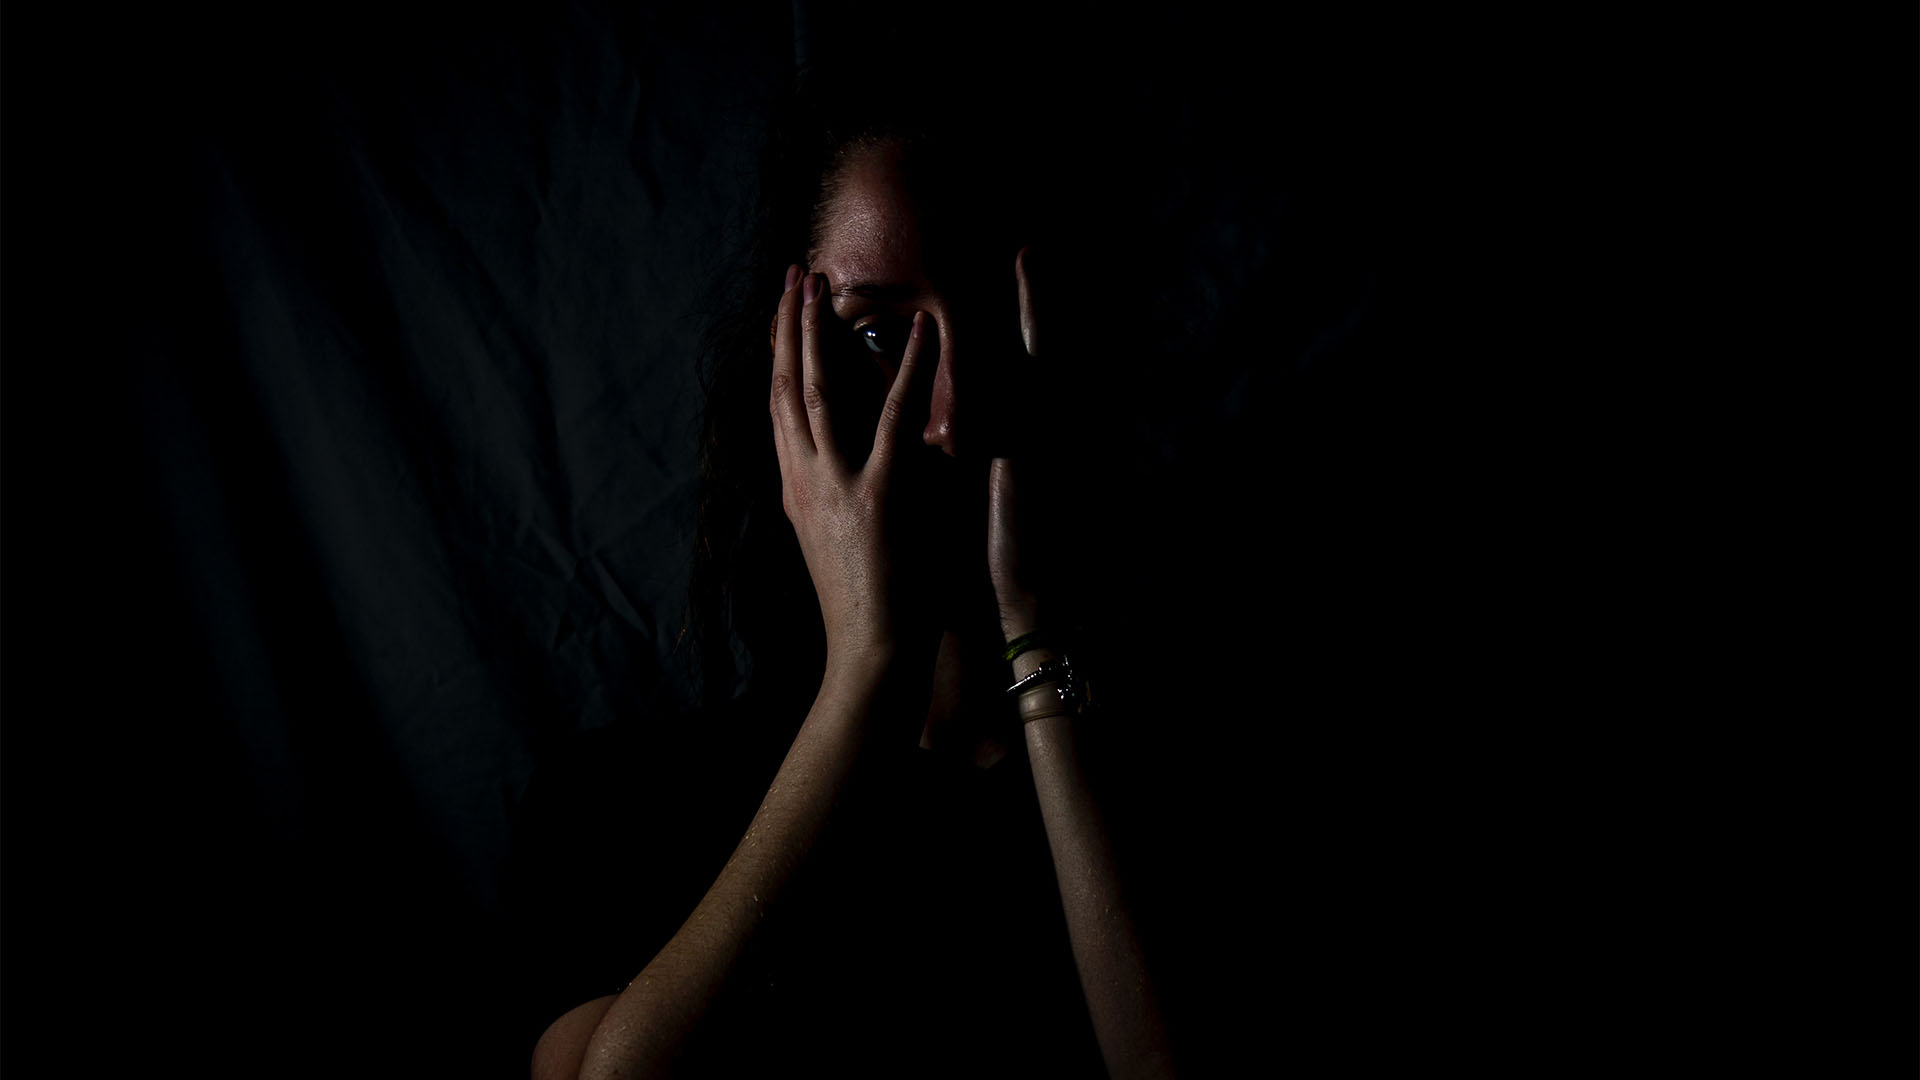 A woman holding her face with her hands in a dark background.